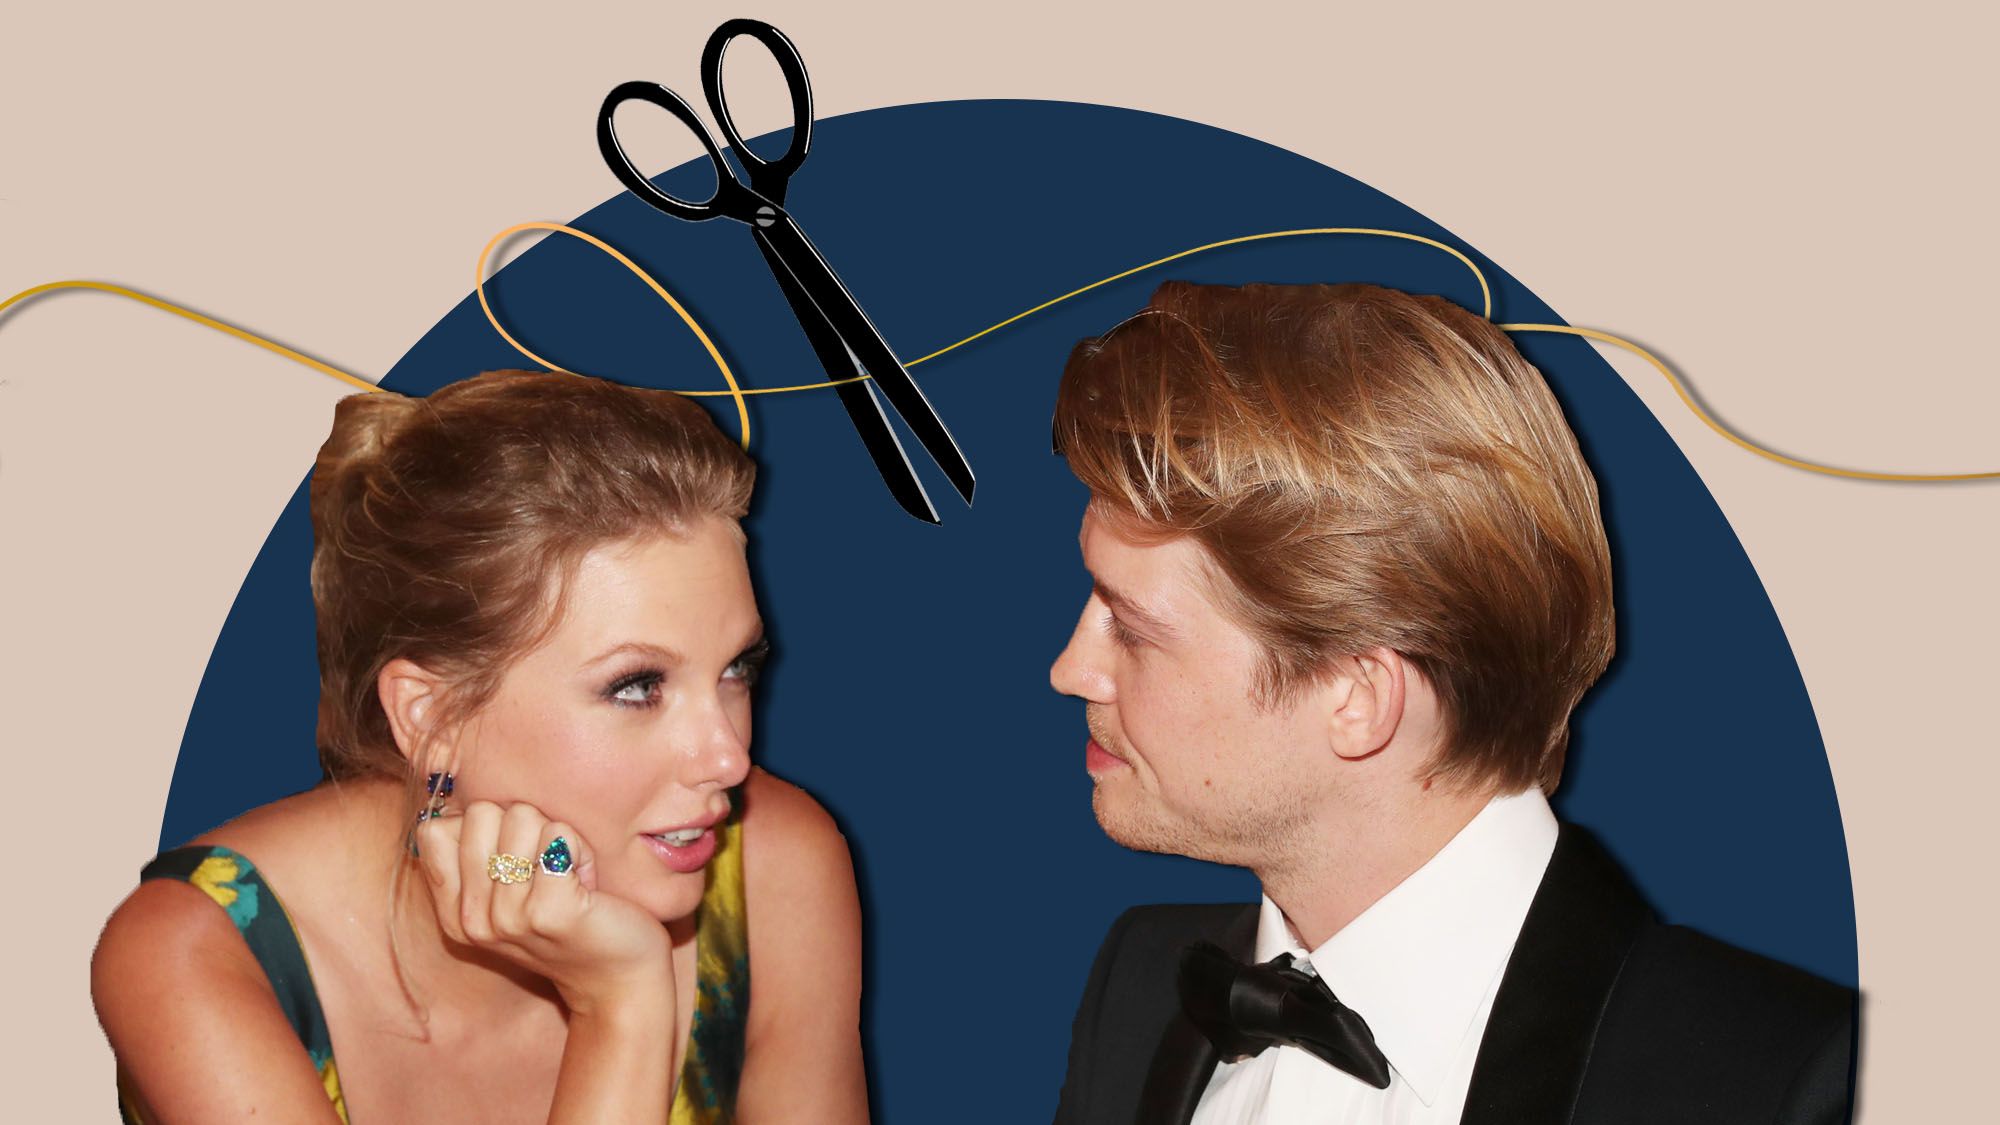 10 of Taylor Swift's Lyrics About Her Famous Exes